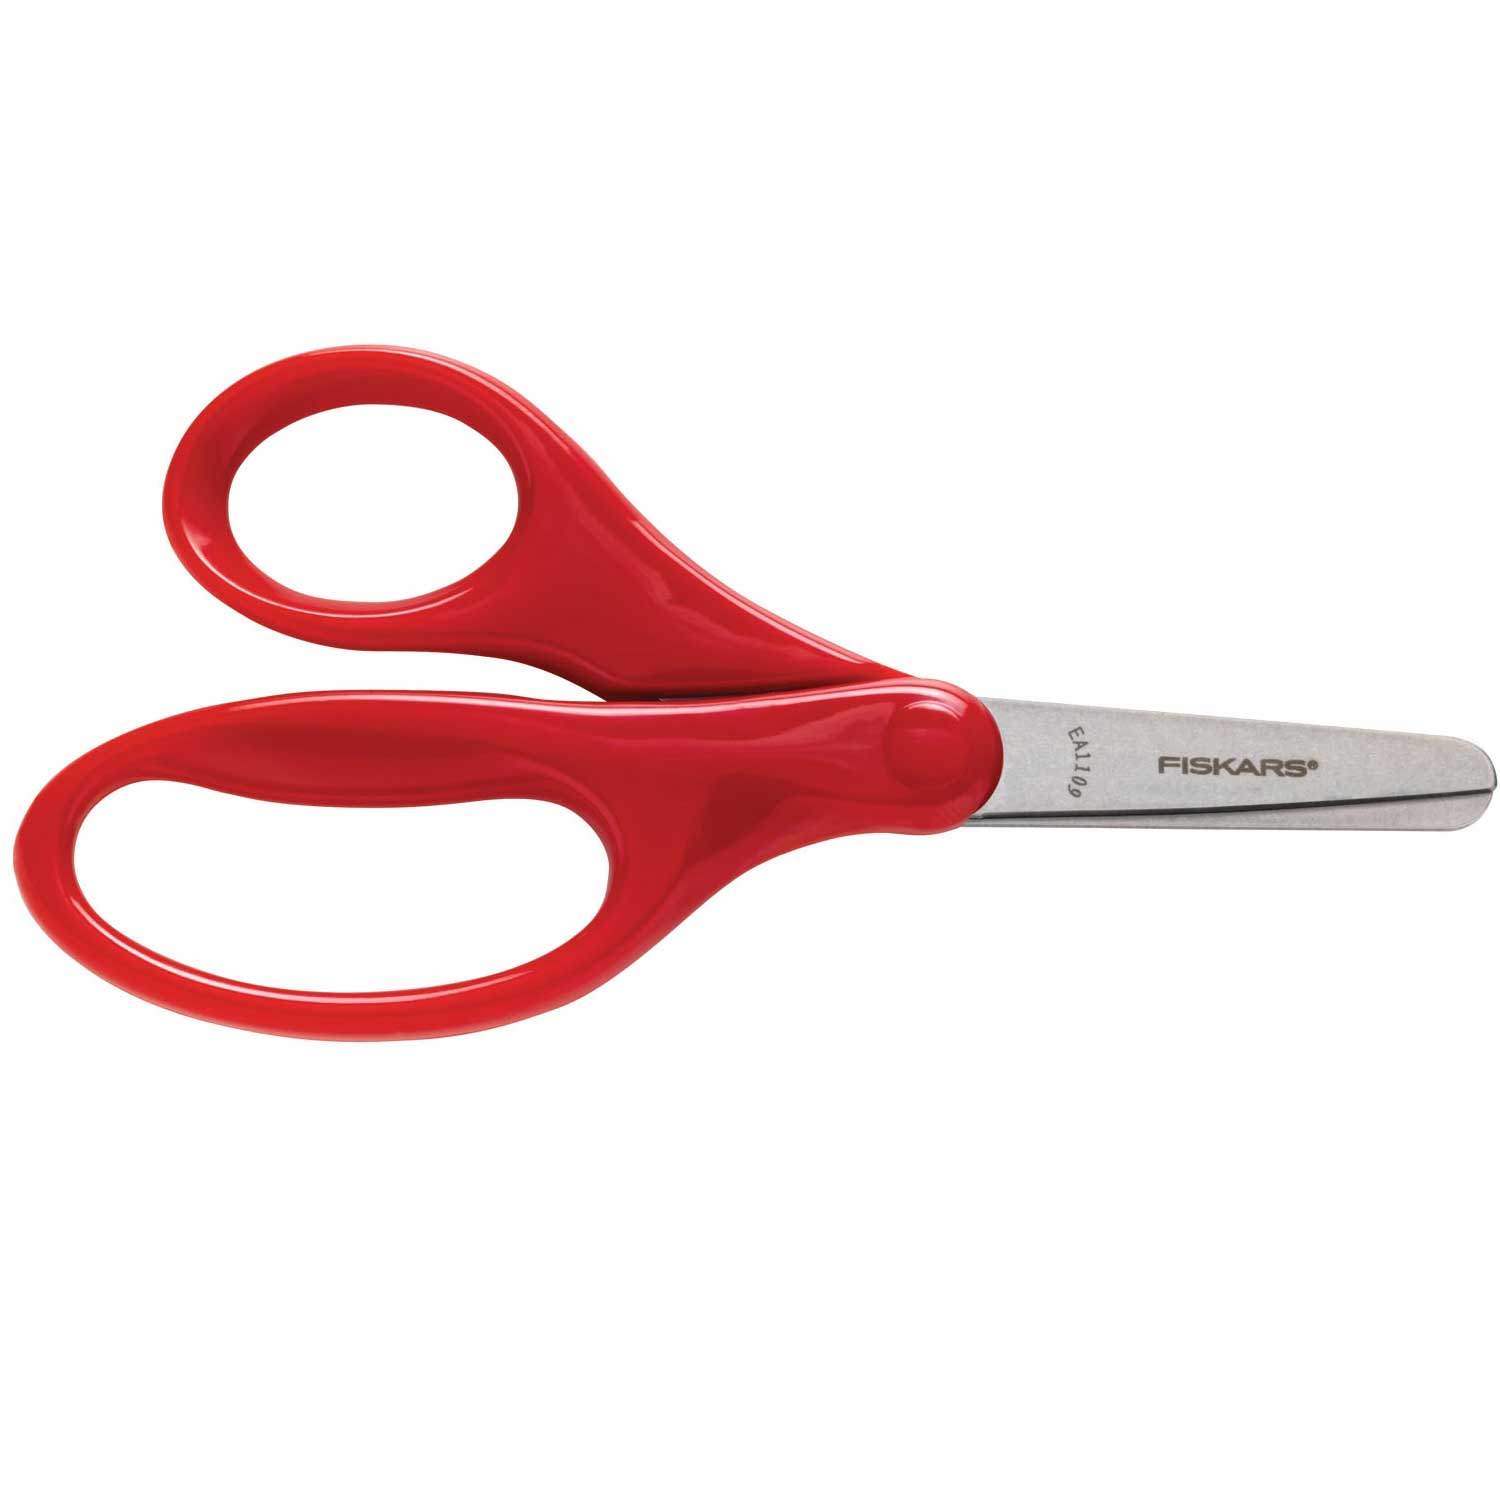 Safety Scissors: Not Just for Kids Anymore – Slice